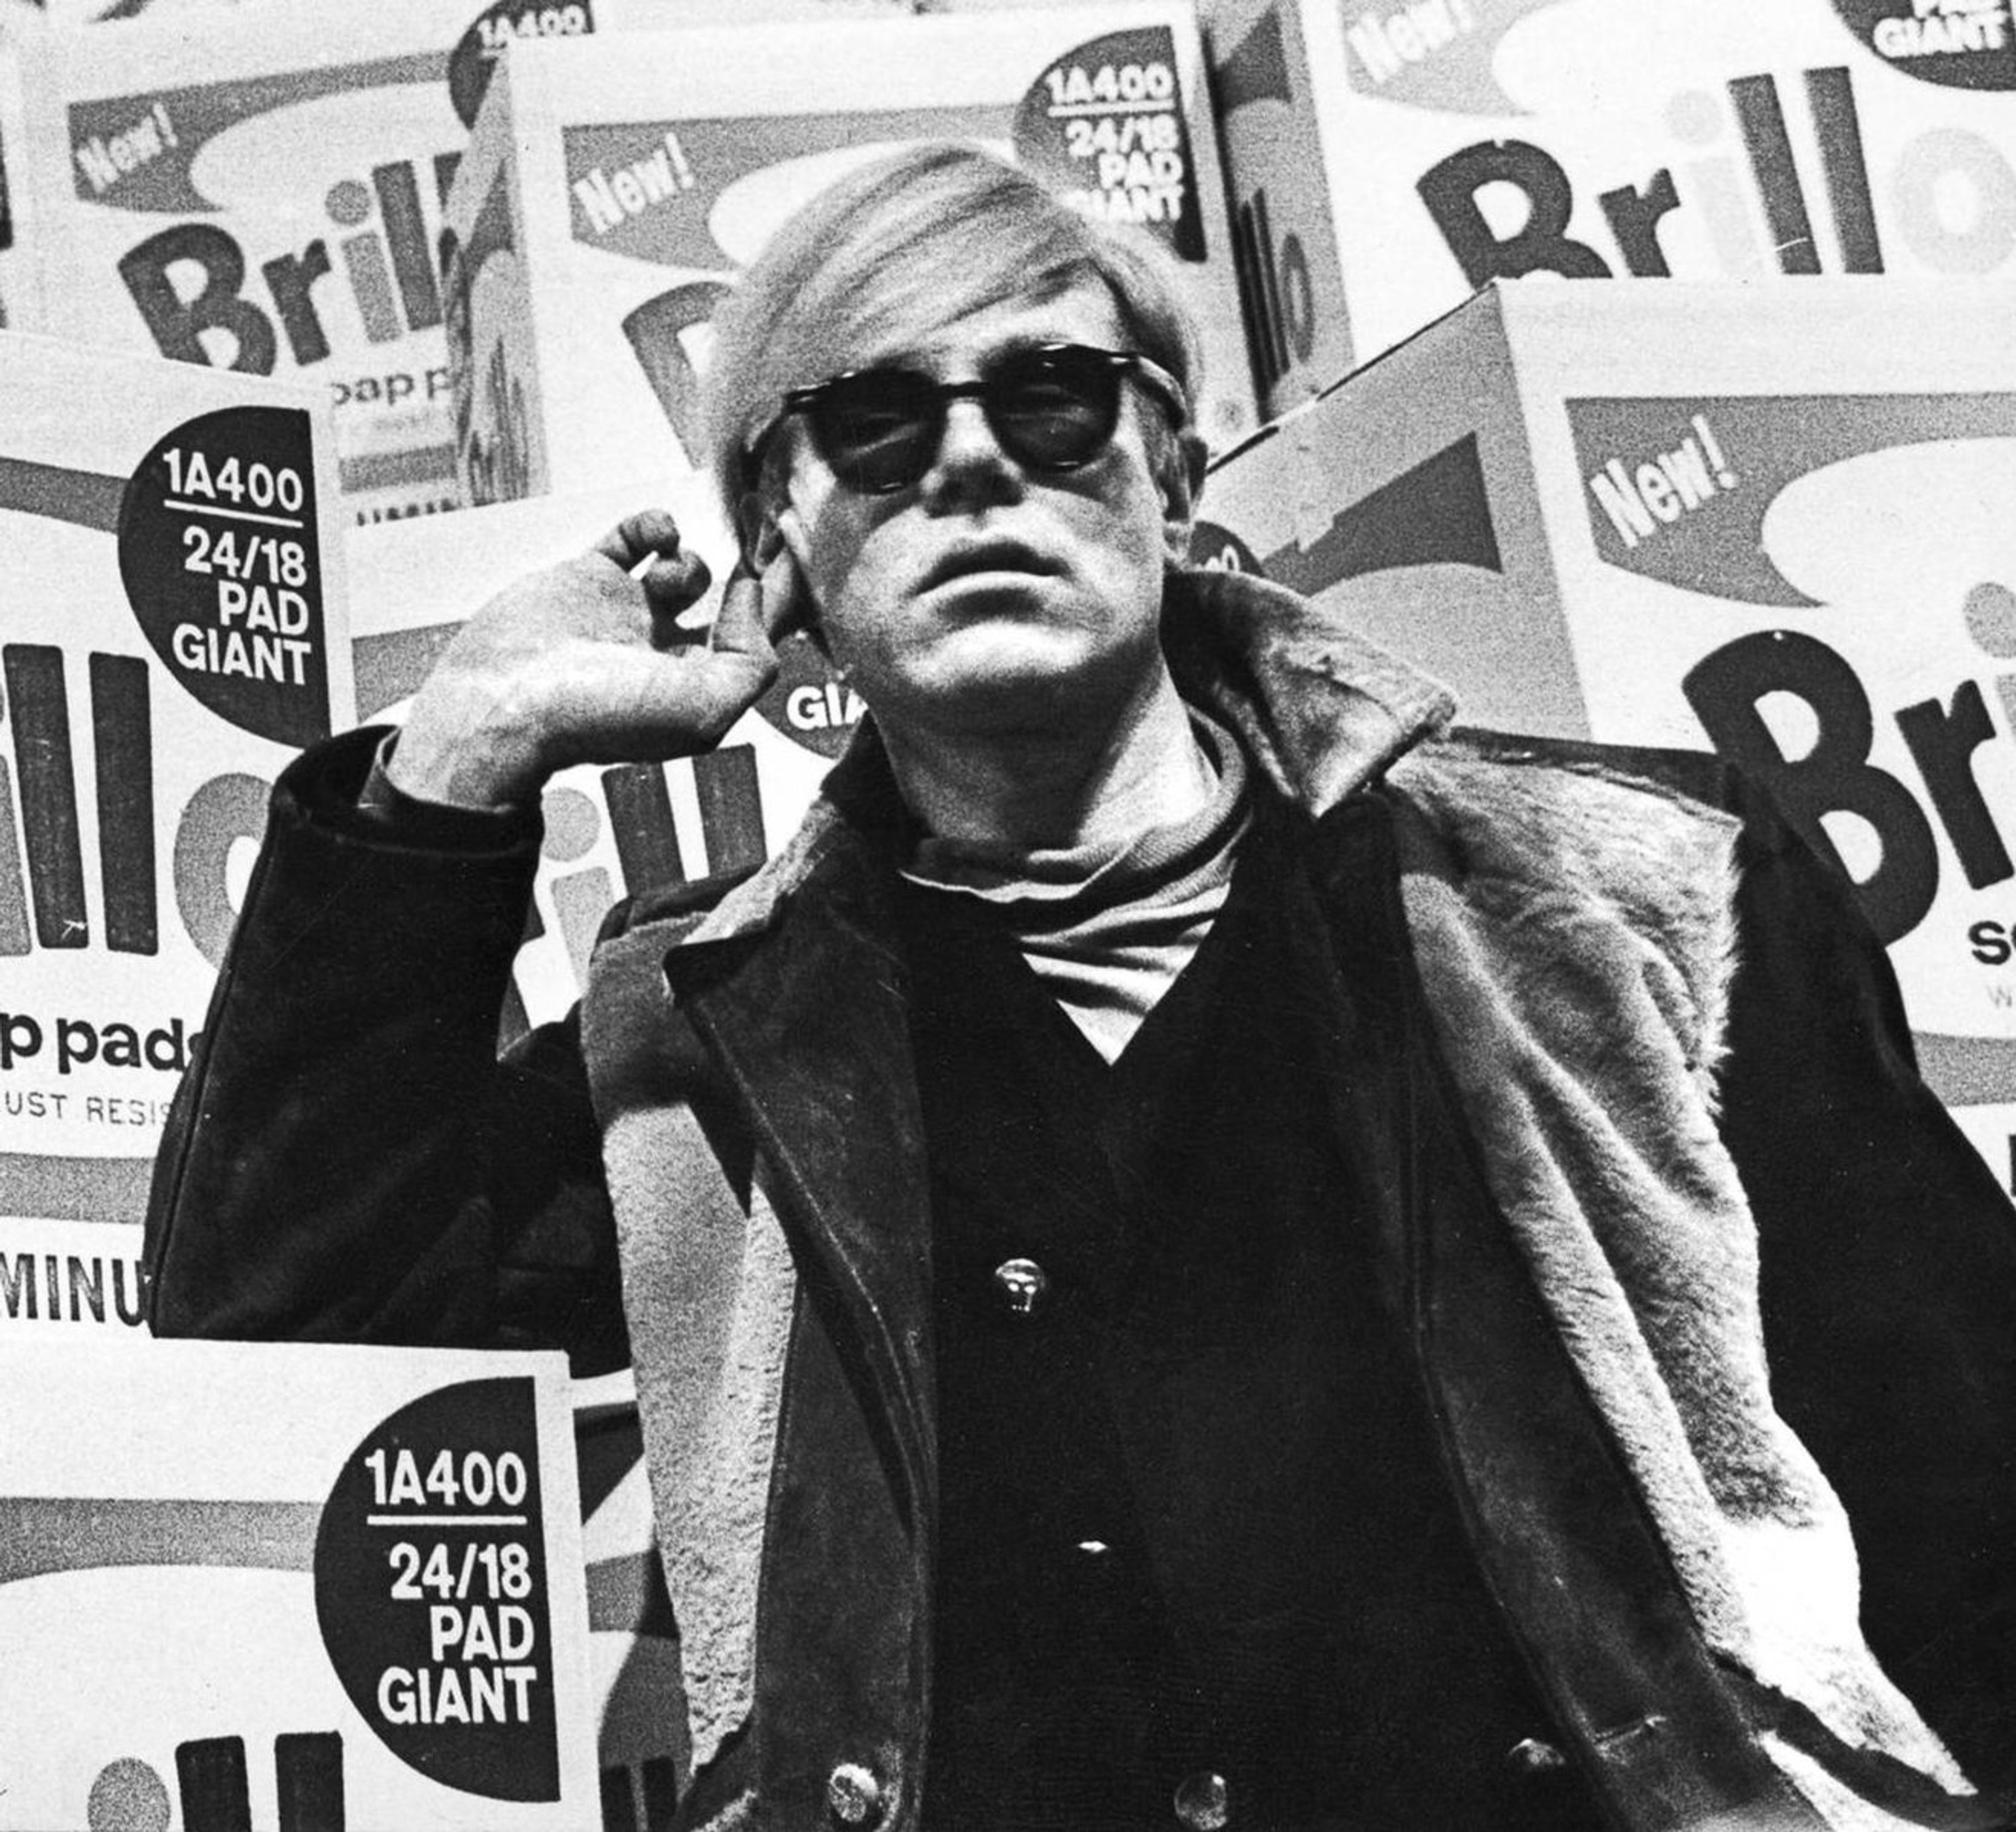 A monochrome image of the artist Andy Warhol standing in front of several of his Brillo boxes. Warhol is wearing a furry gilet and sunglasses.